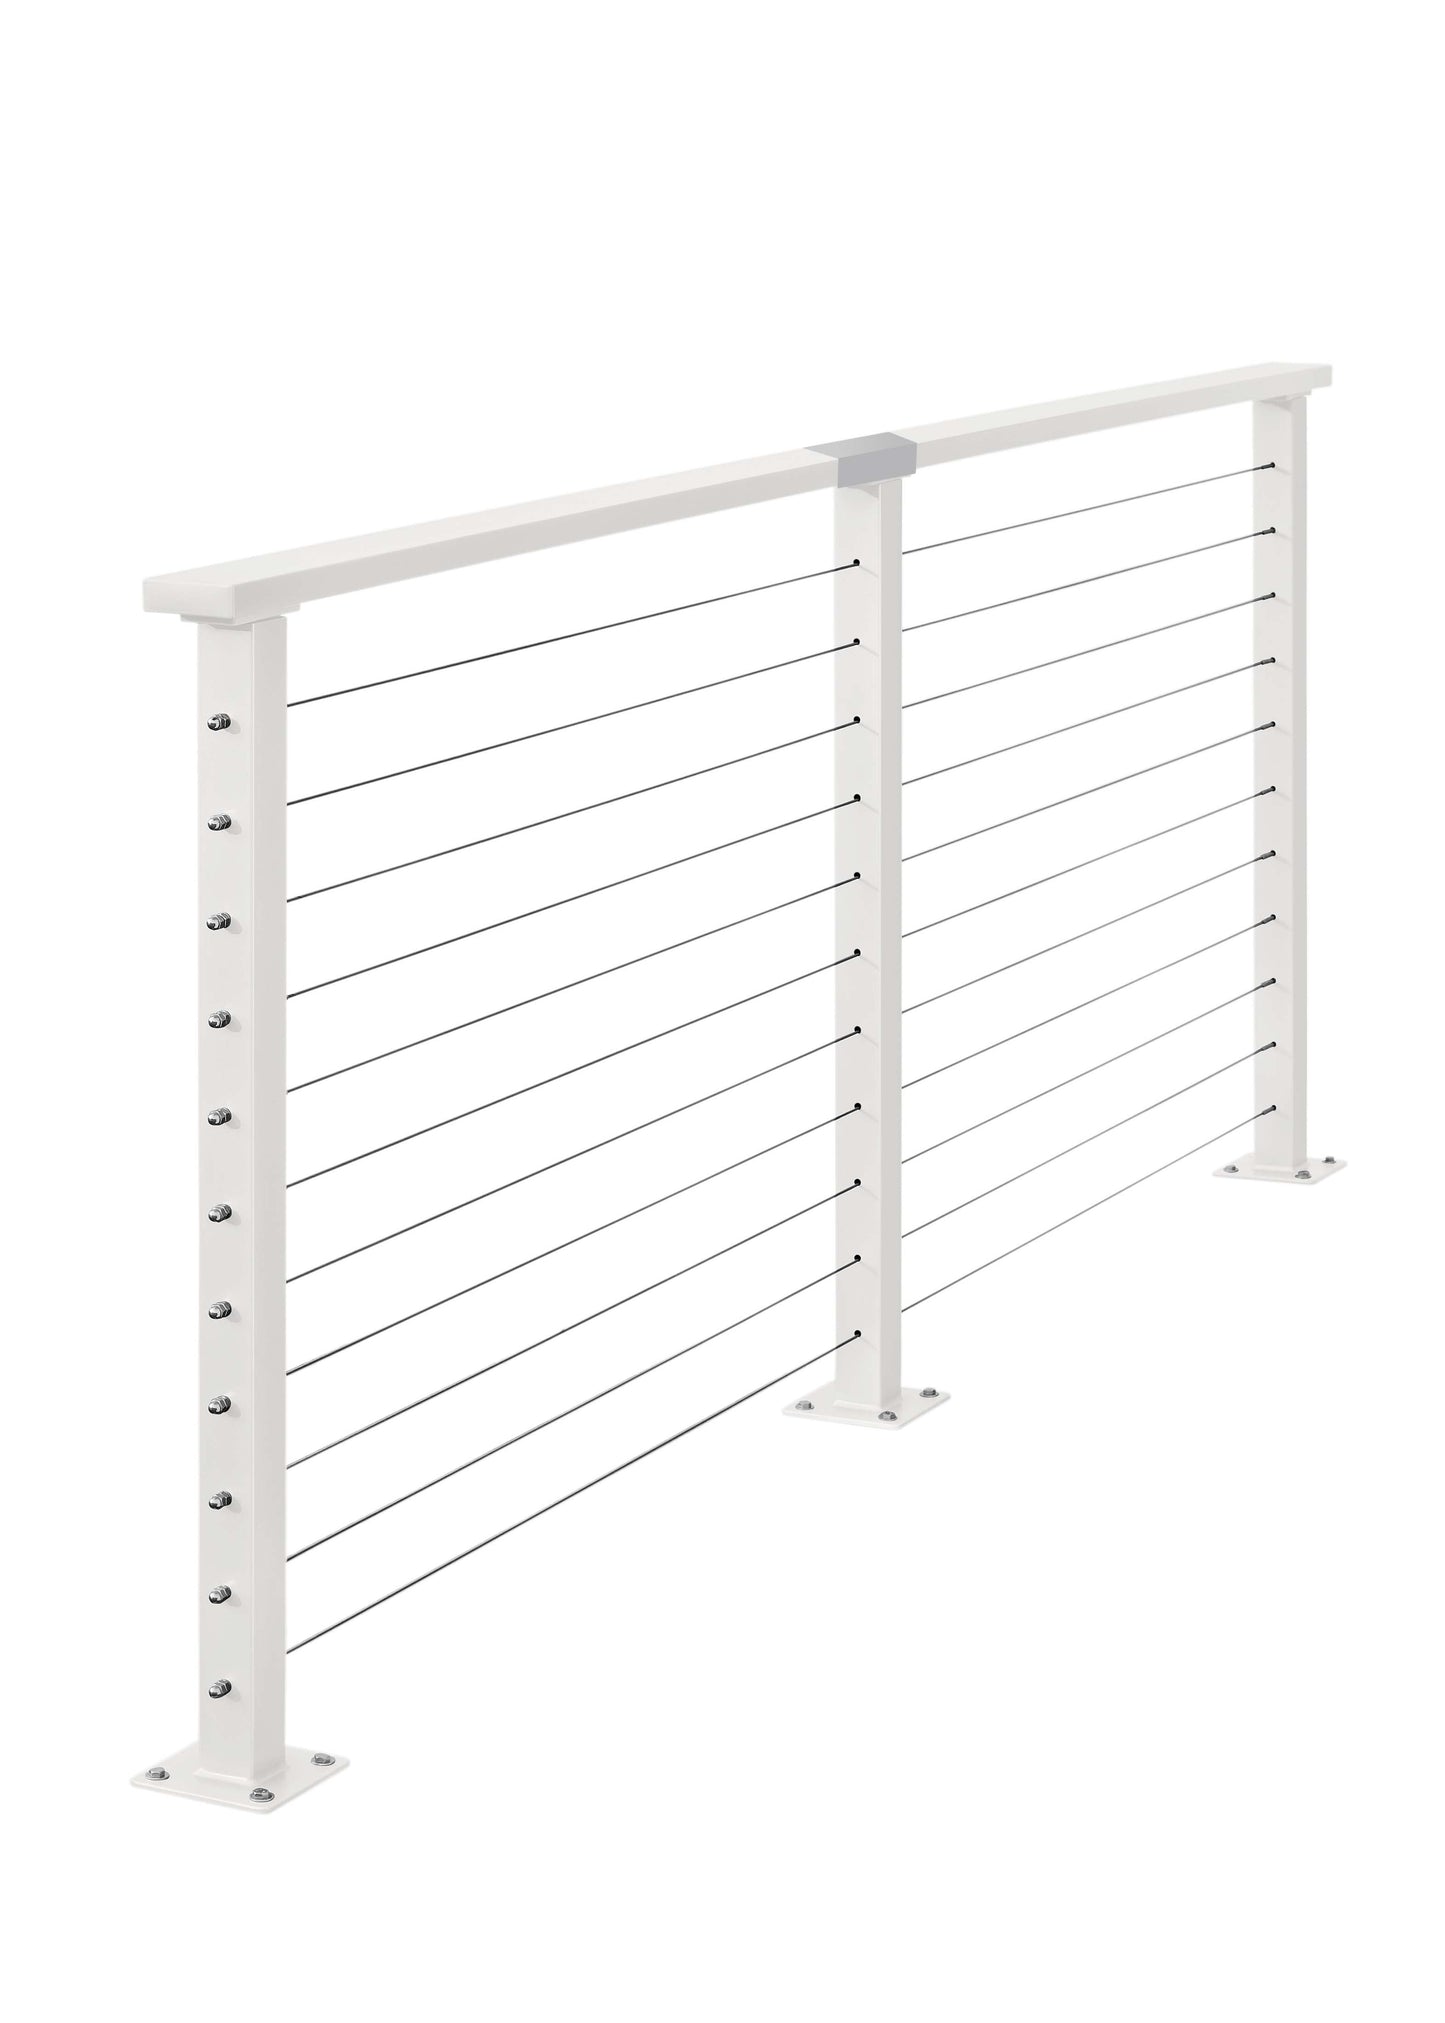 8 ft. White Deck Cable Railing , Stainless